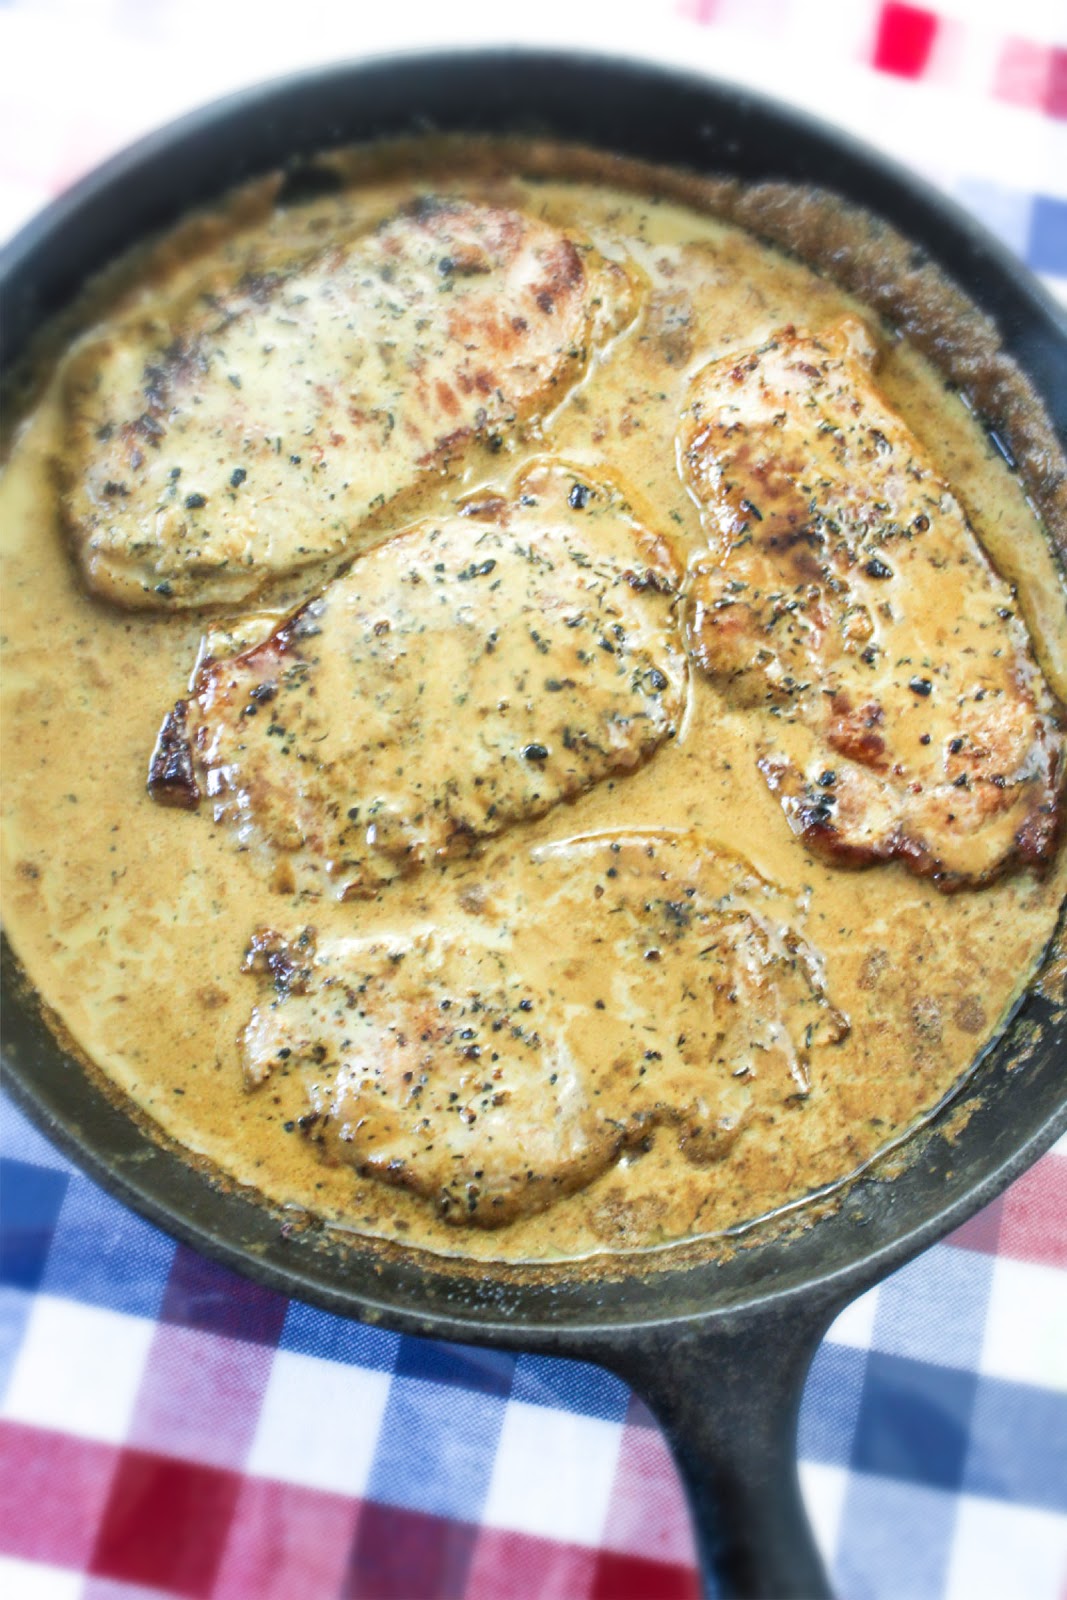 How To Make Southern Smothered Boneless Pork Chops Hearty And Delicious